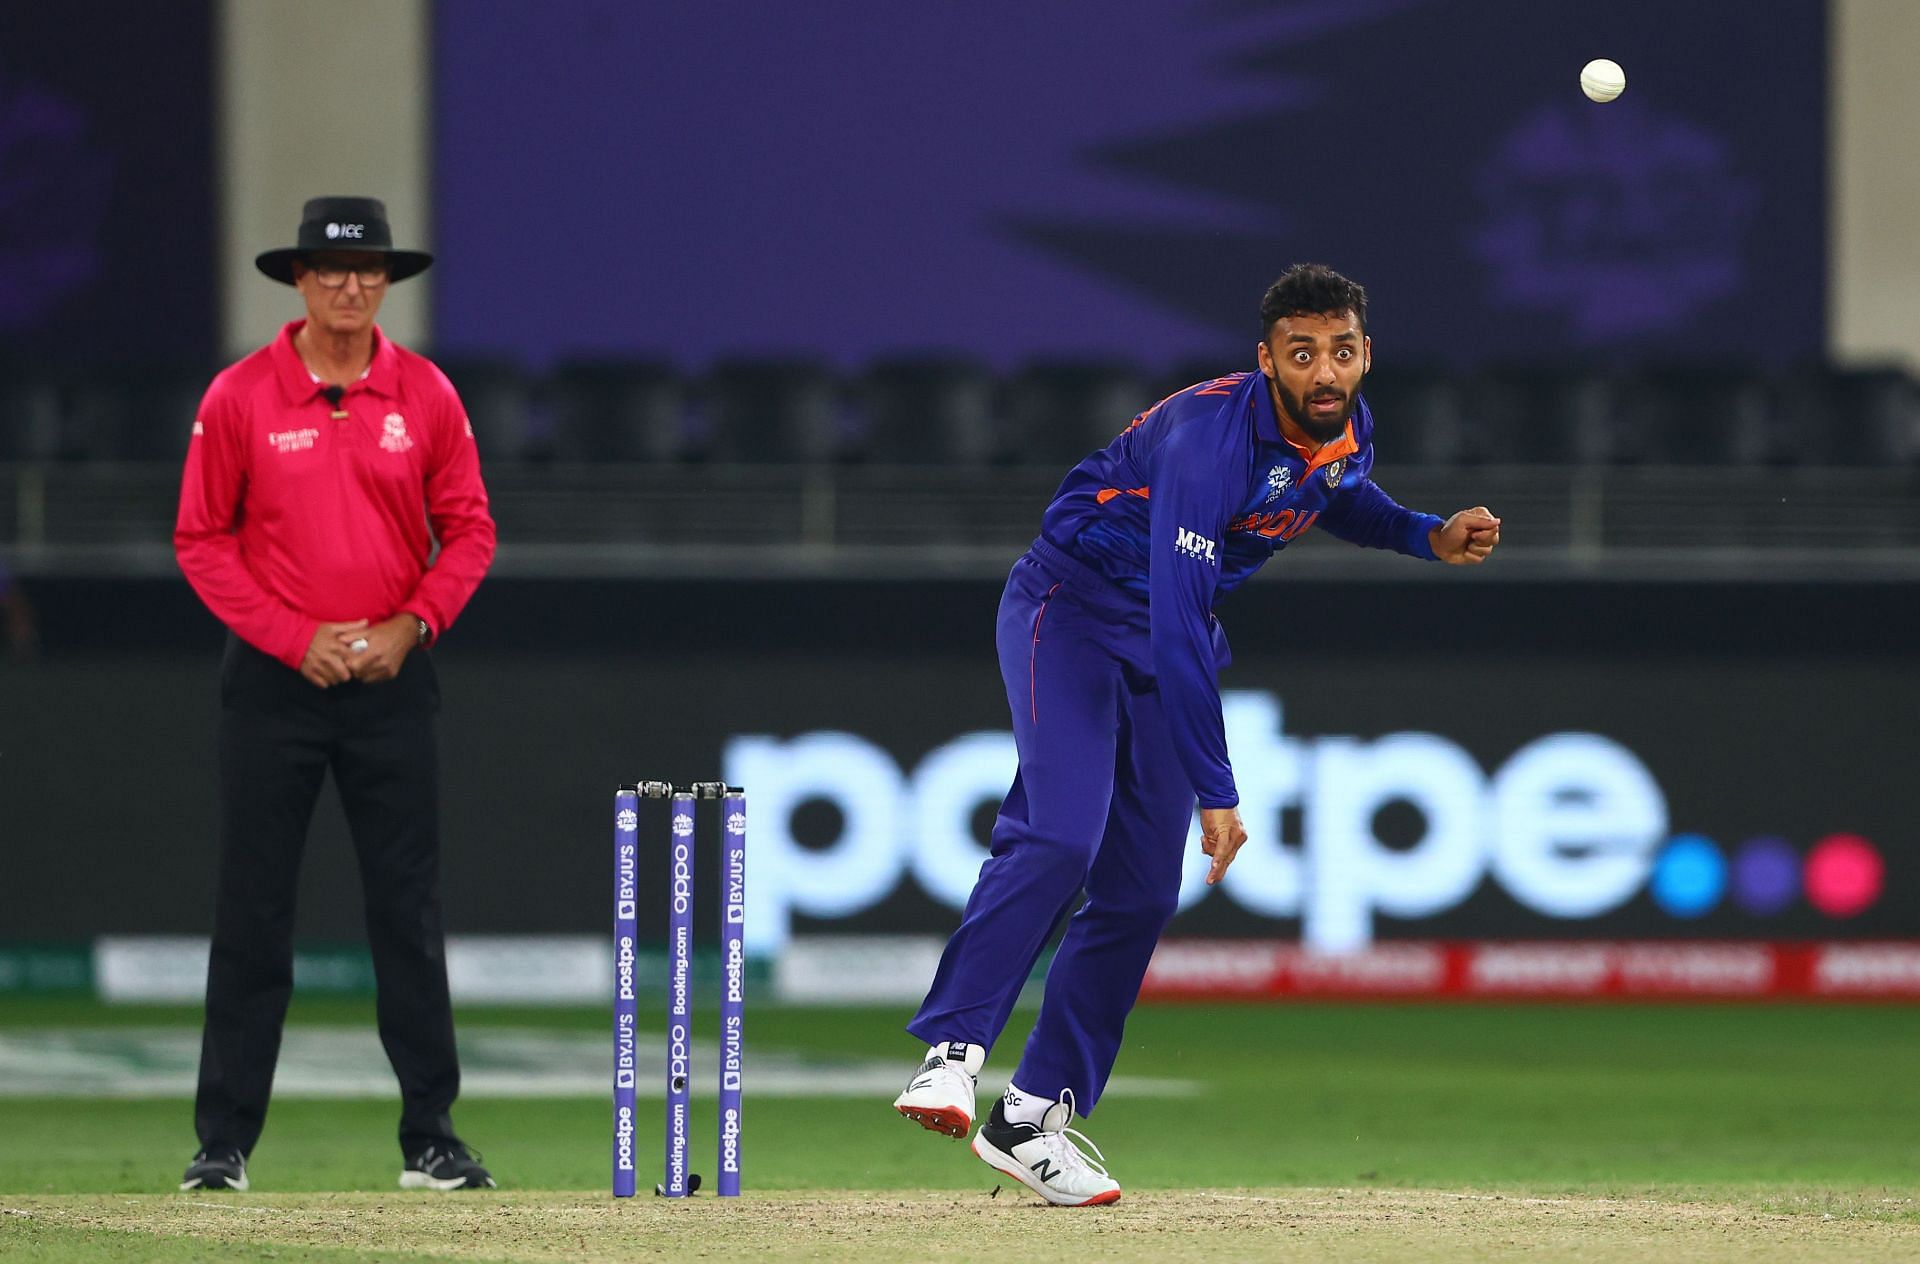 Varun Chakaravarthy in action during his spell versus Scotland at the 2021 T20 World Cup